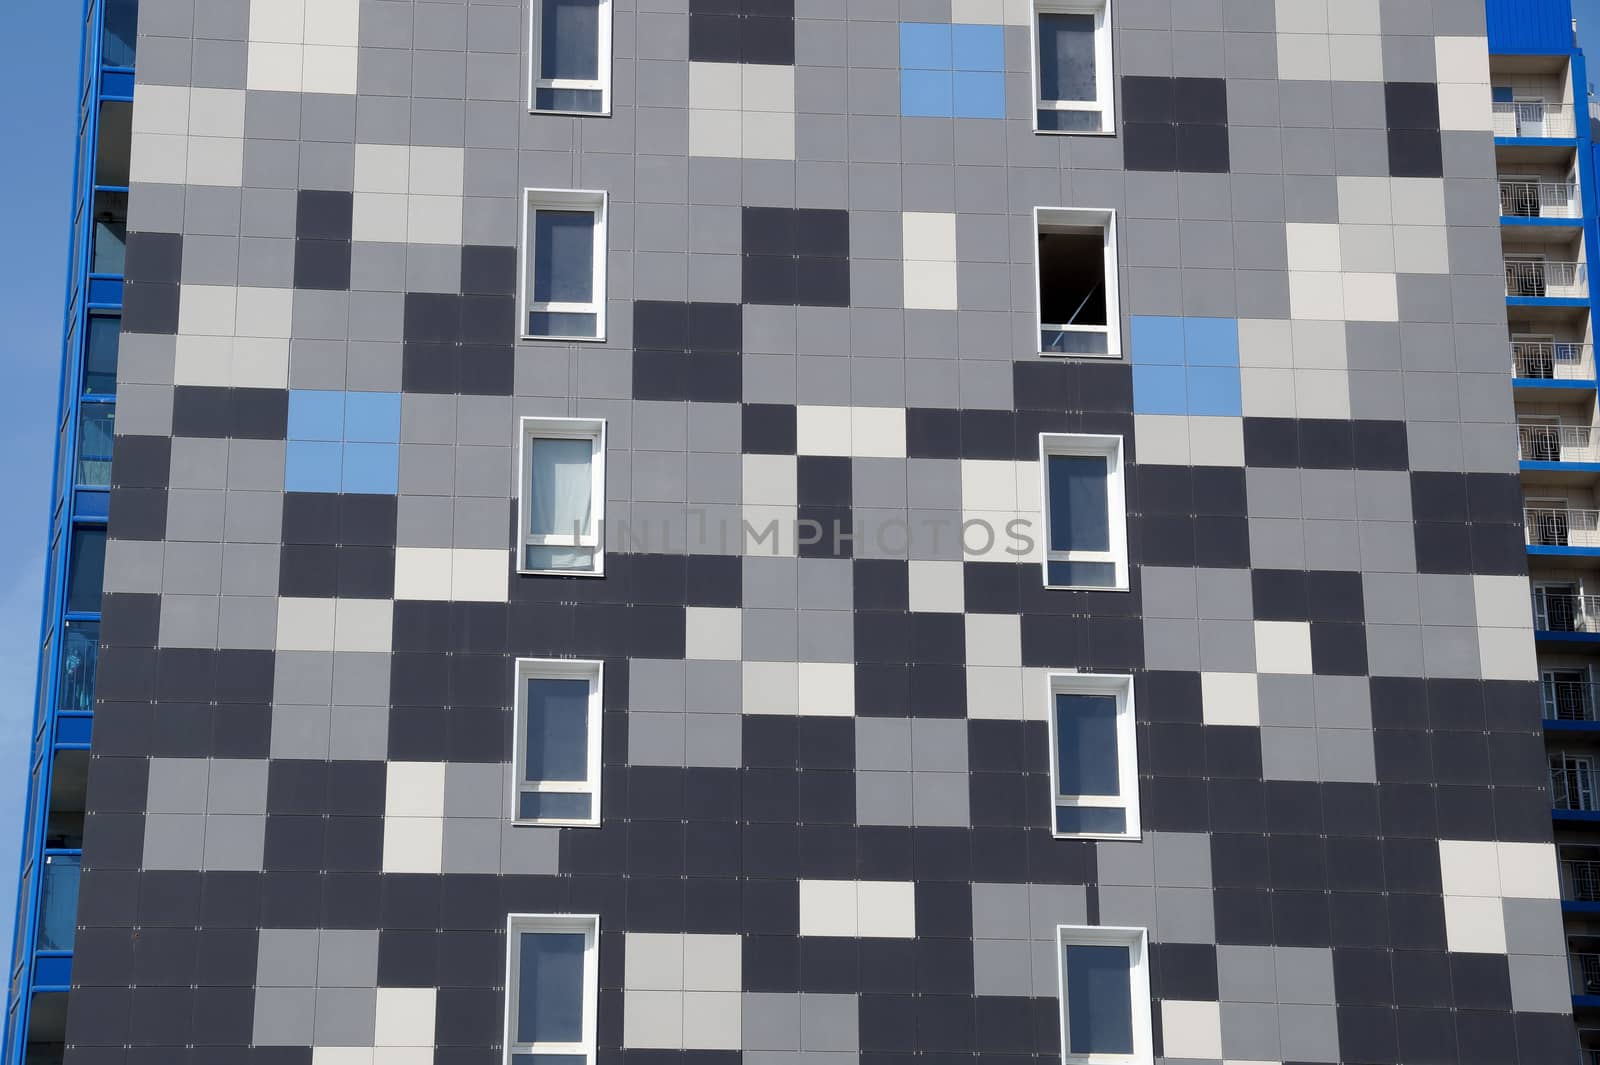 The new house revetted with a multi-colored granite tile in the city of Volgograd